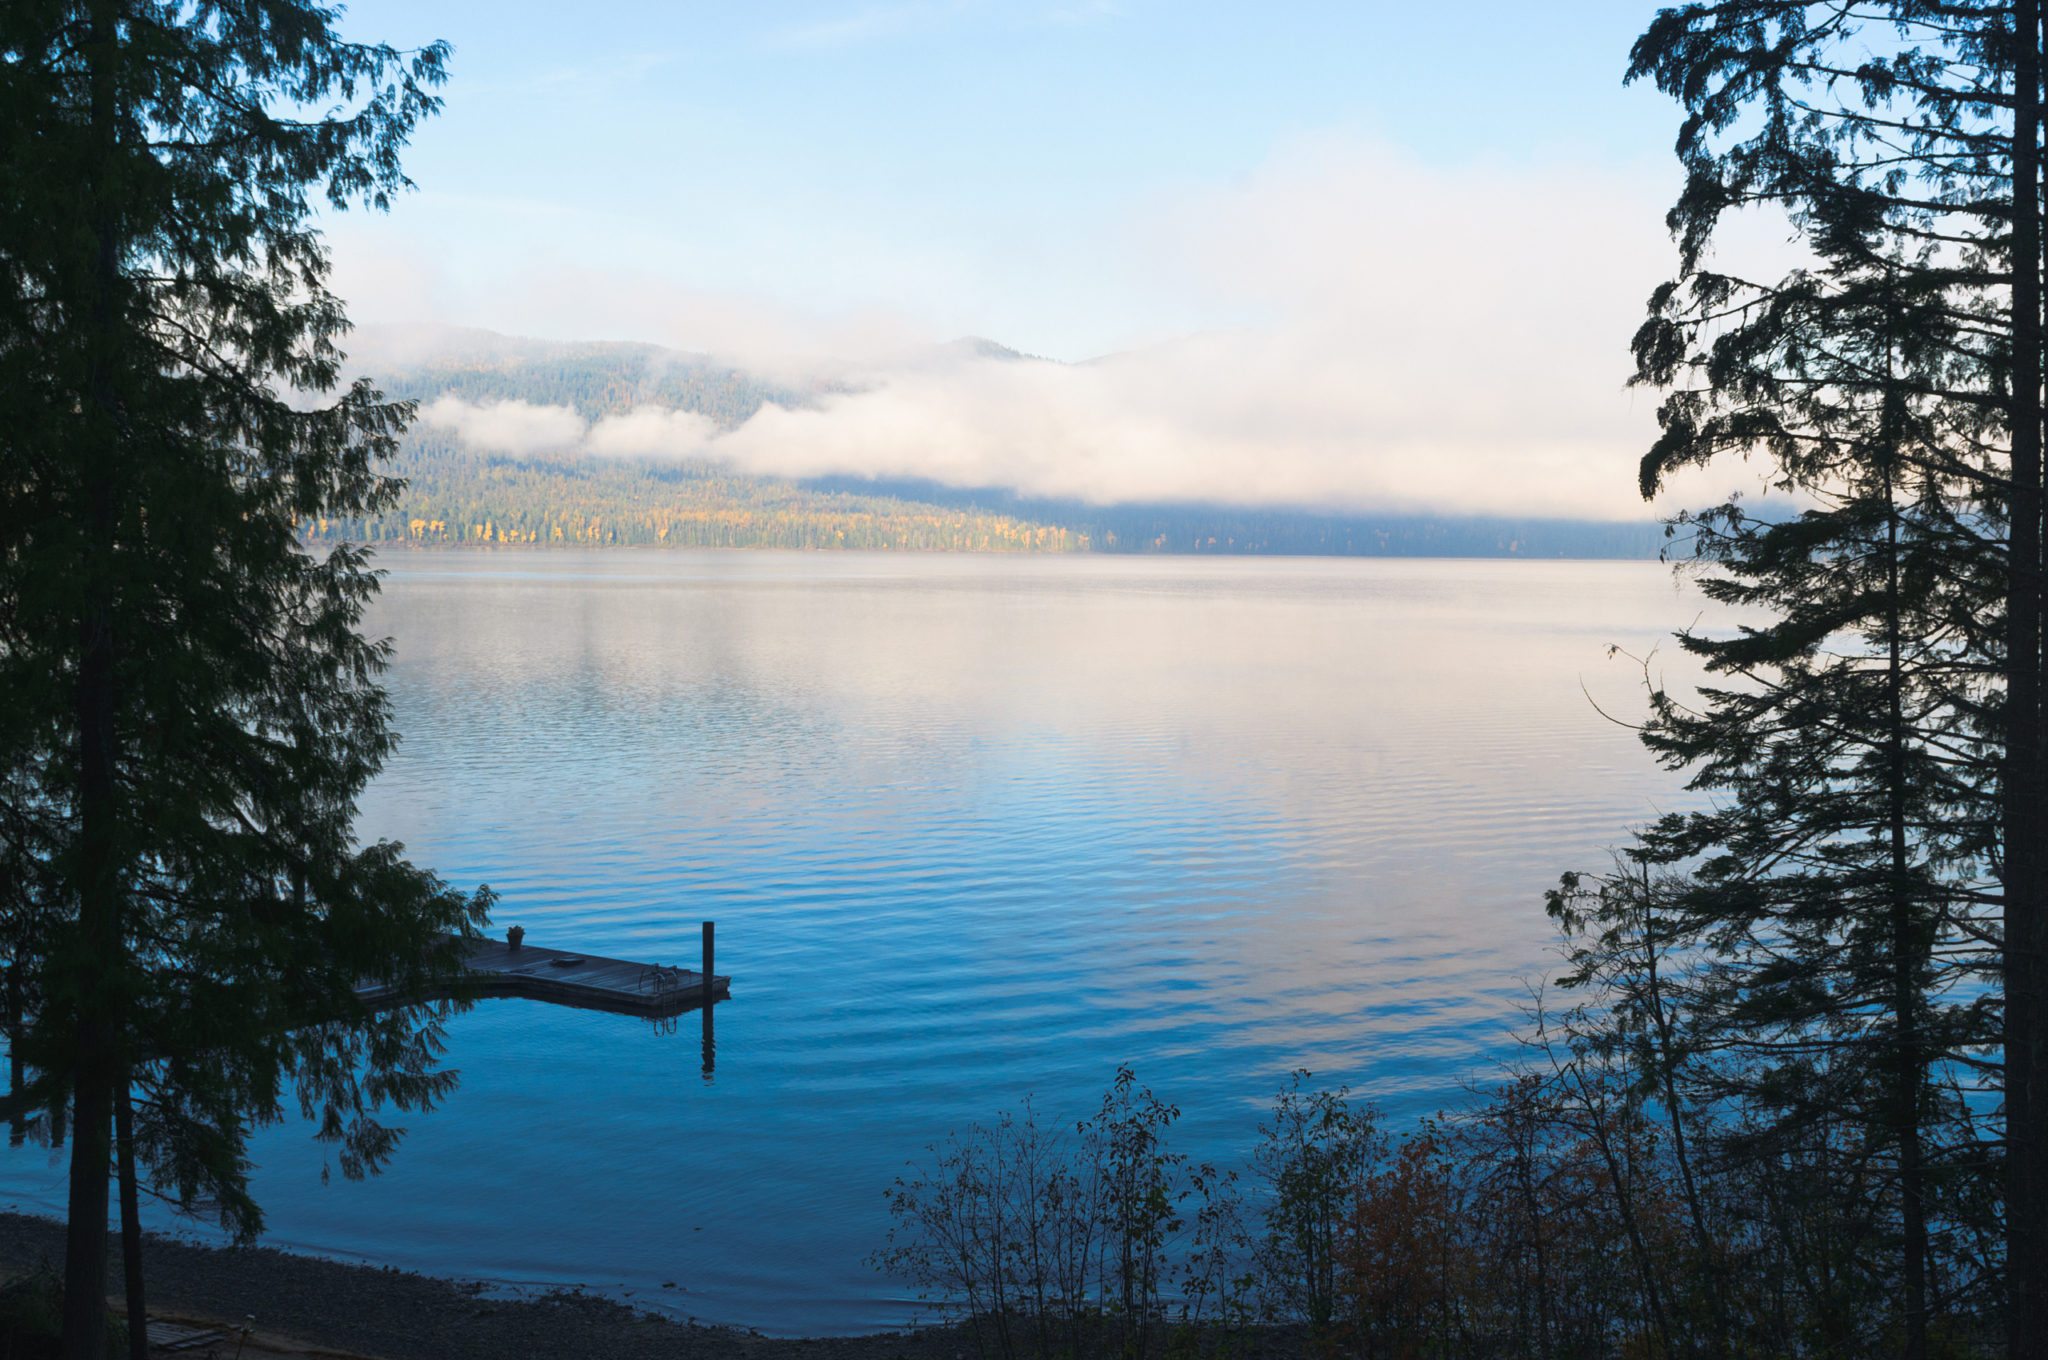 A scenic view of Priest Lake in the Idaho Panhandle.